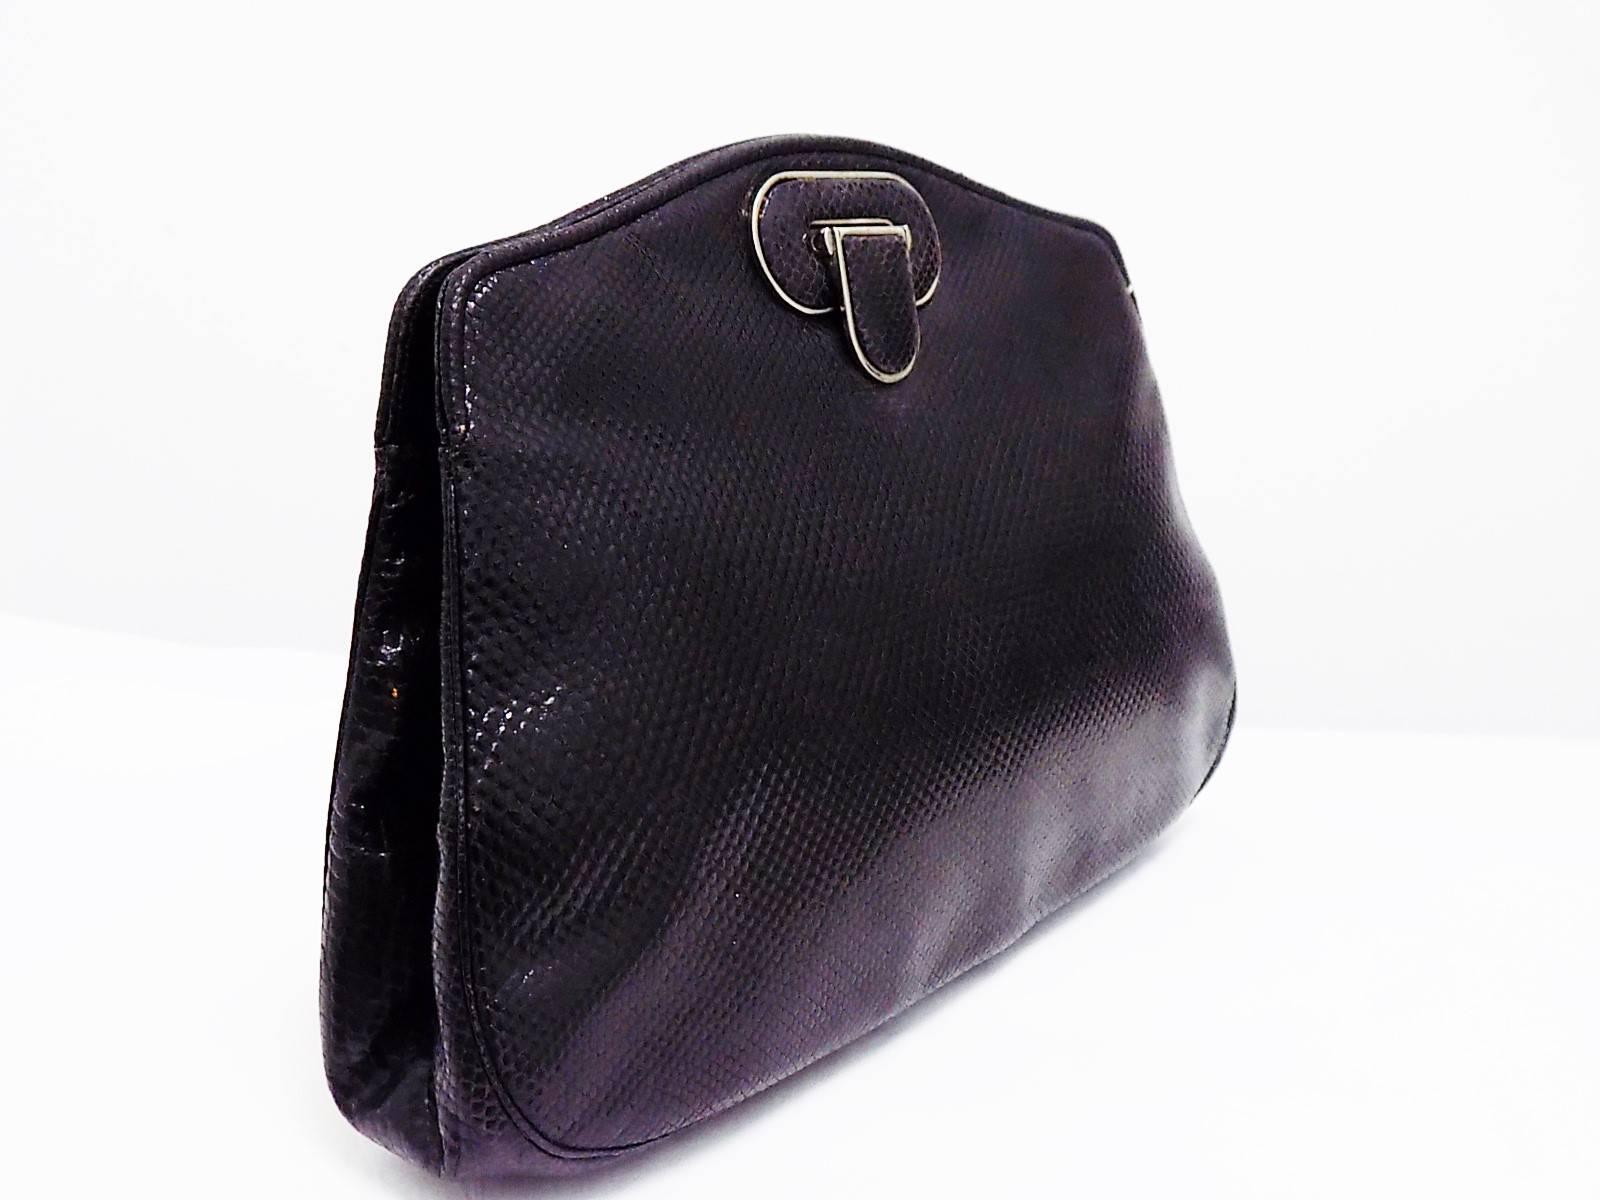 Very pretty and perfect size for all your necessities . Vintage Judith Leiber black exotic skins  bag. . Silver tone hardware. Fabulous Bag in Bag design with snap closure and three compartments.    Measures 10.5